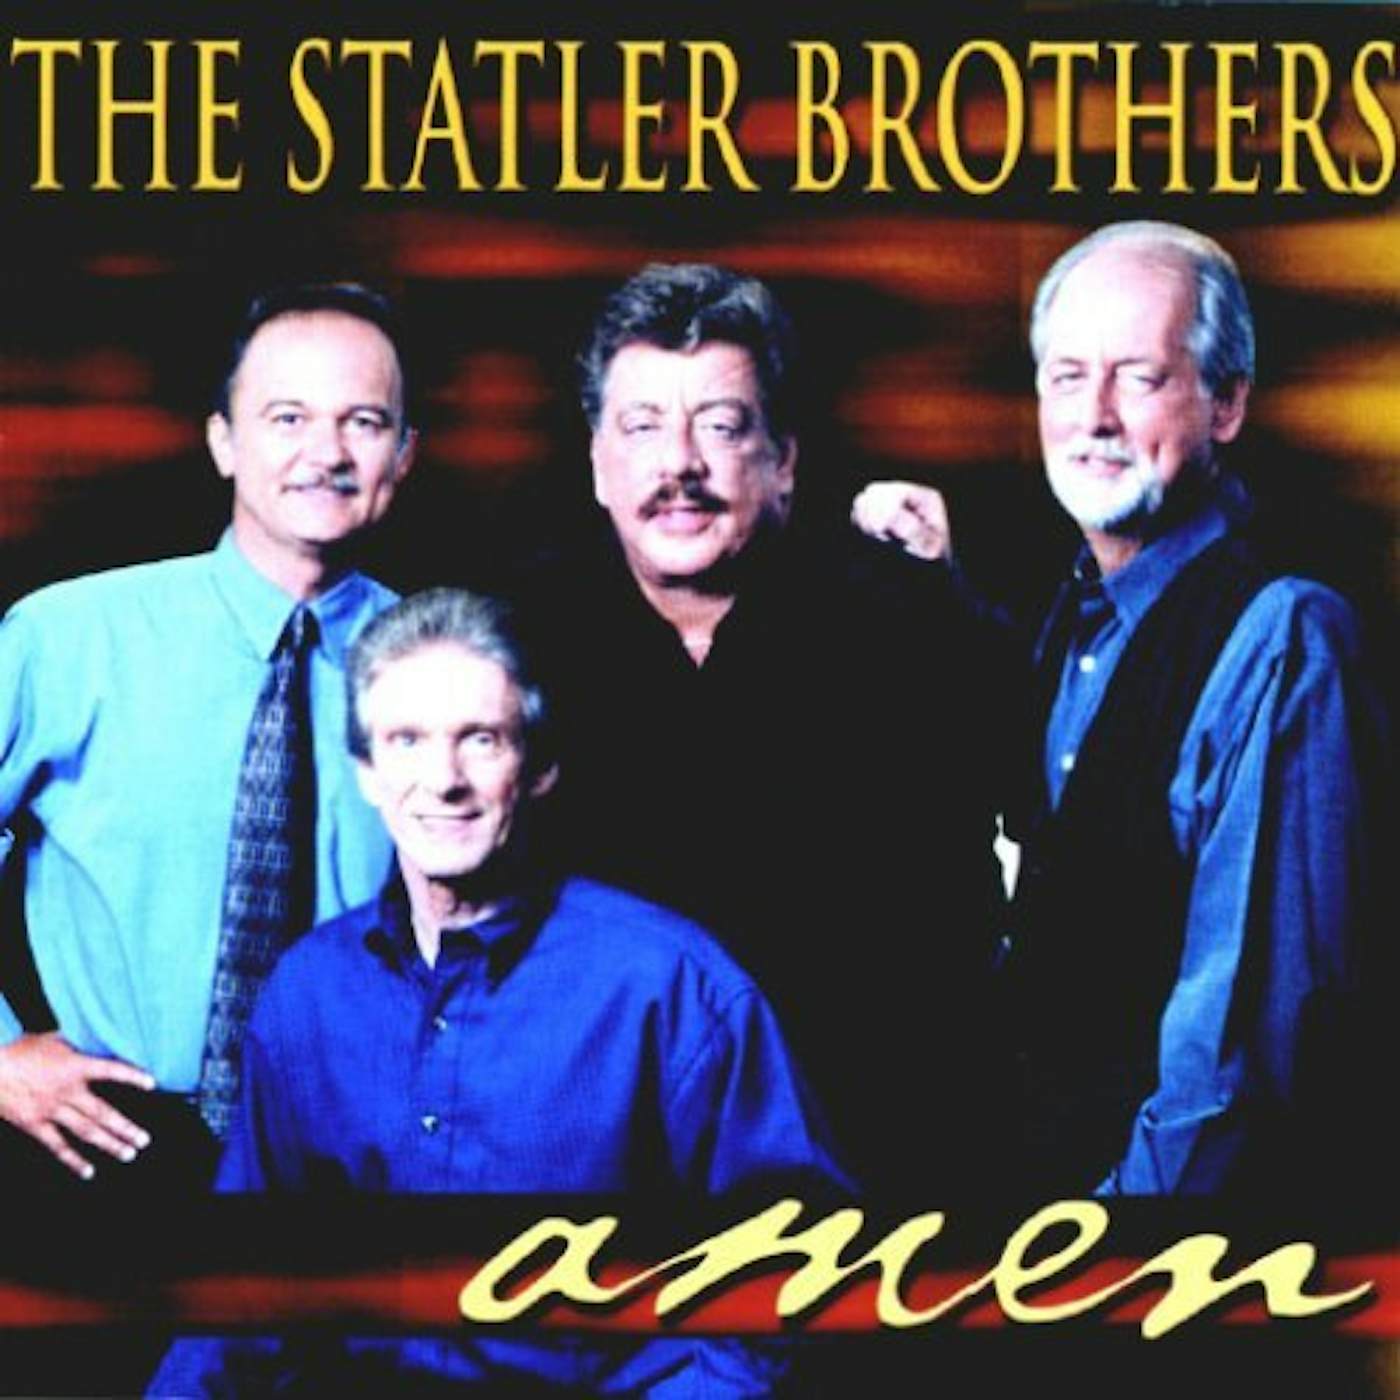 The Statler Brothers AMEN CD